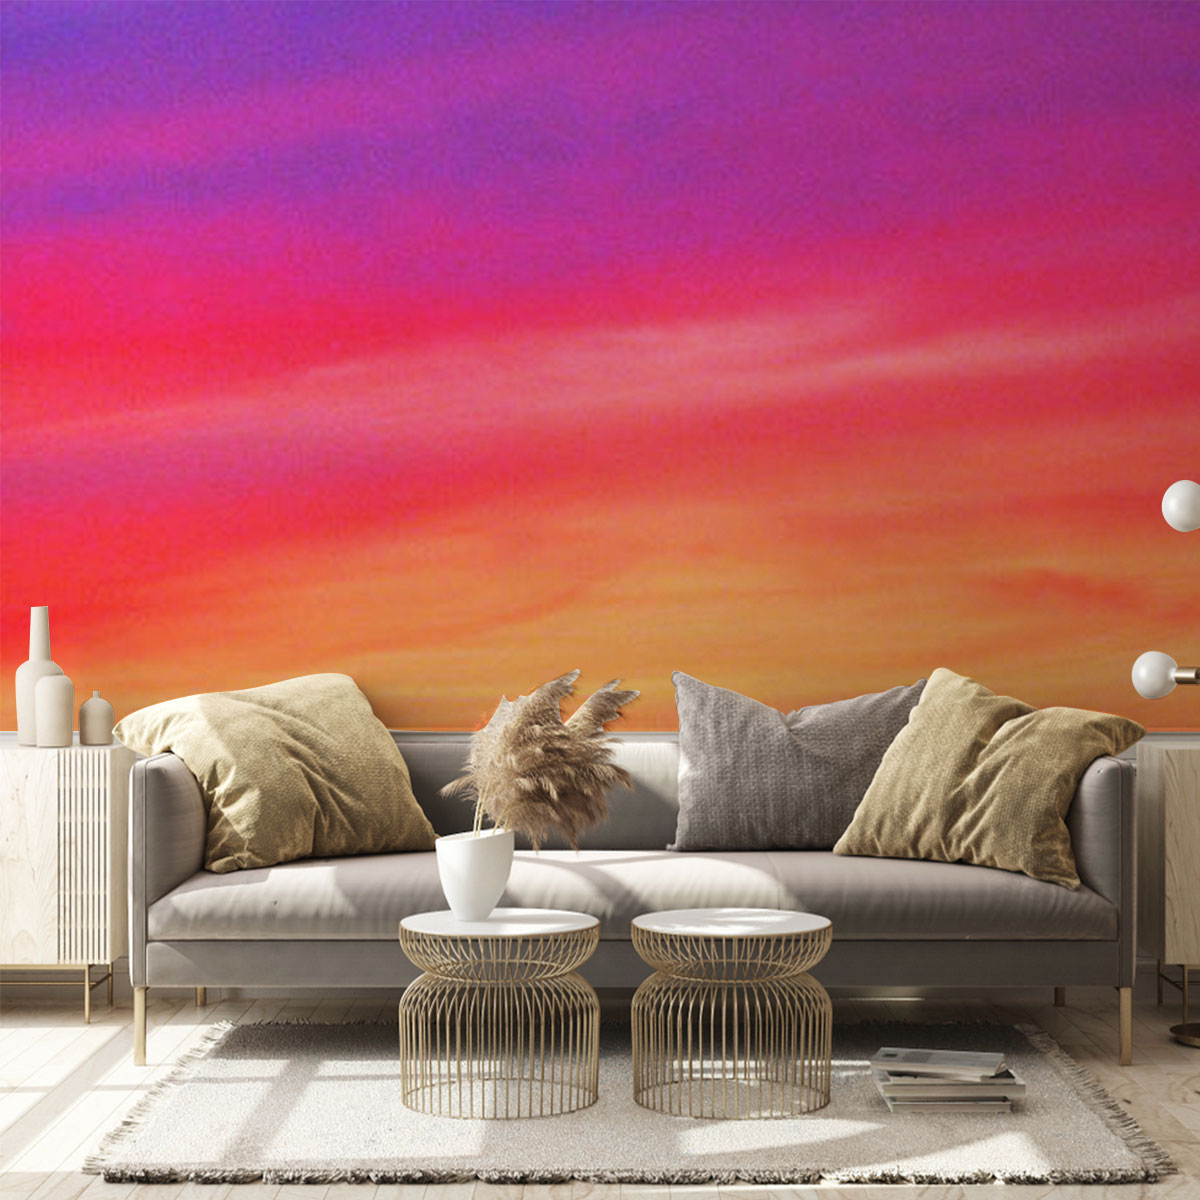 Sky At The Sunset Wall Mural